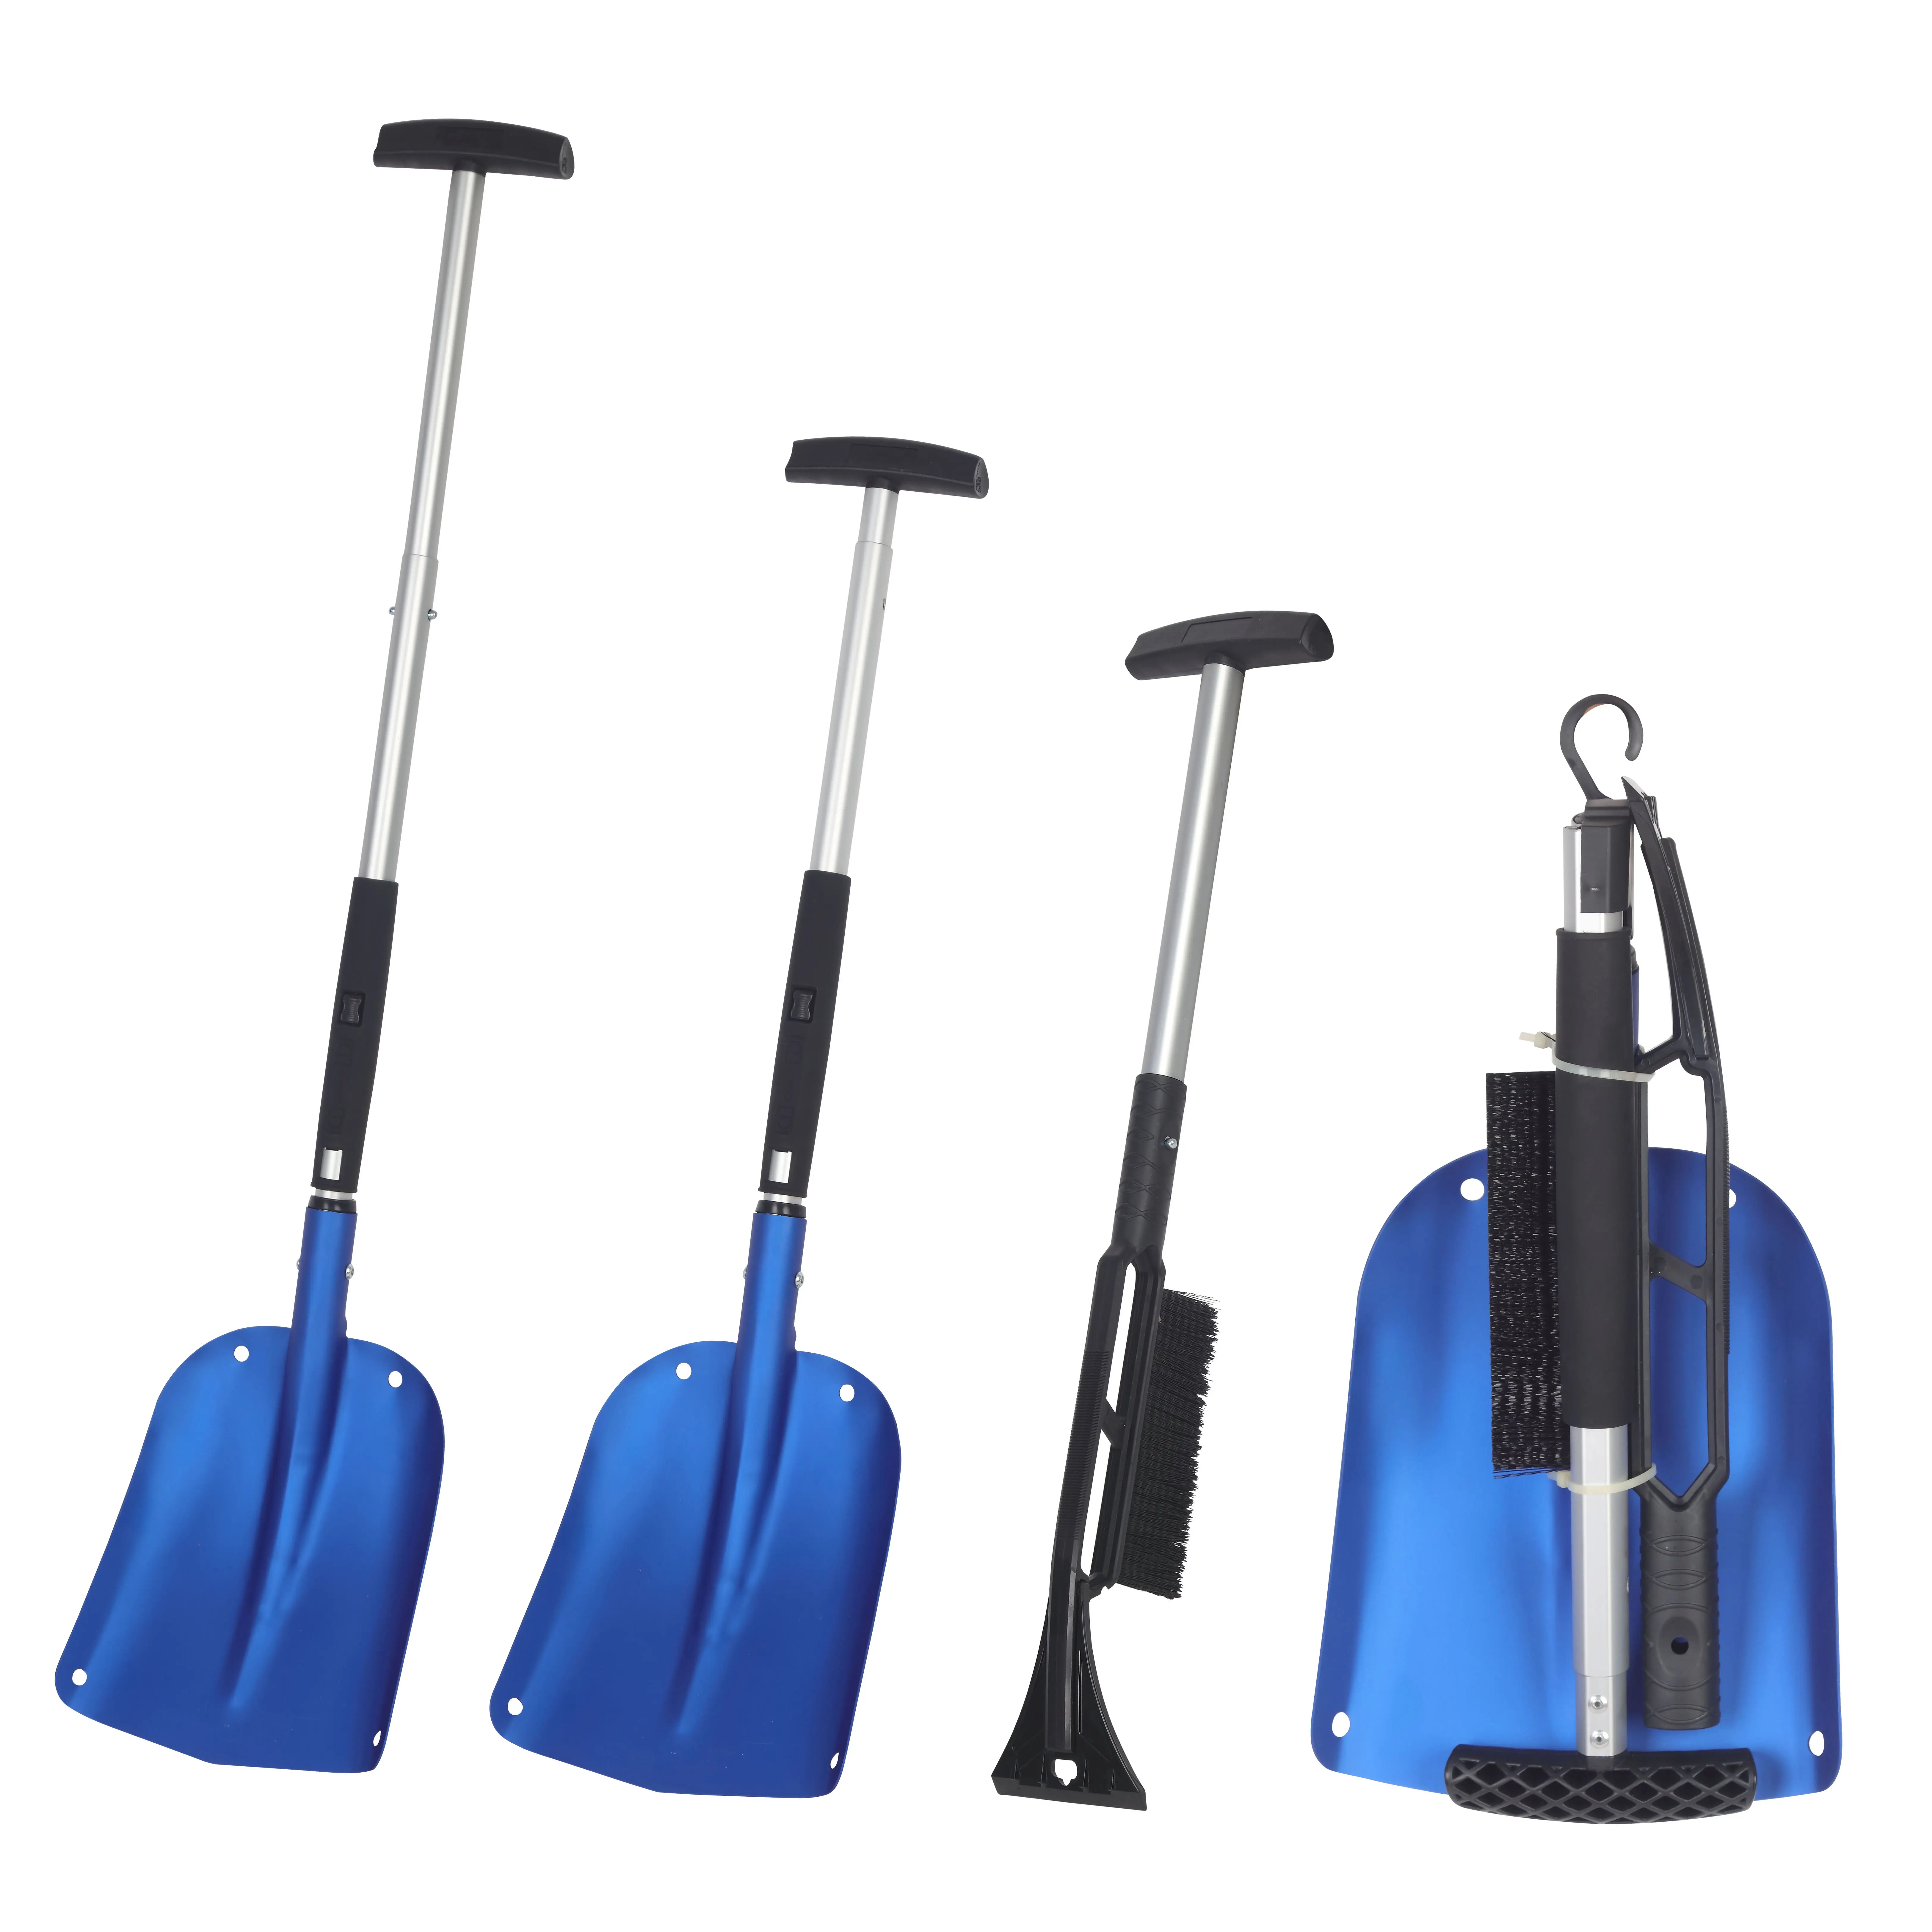 Multi-function Snow Shovel 3 IN 1 Aluminum Shovel with Snow Brush and Ice Scraper Urgent use for Car/Truck